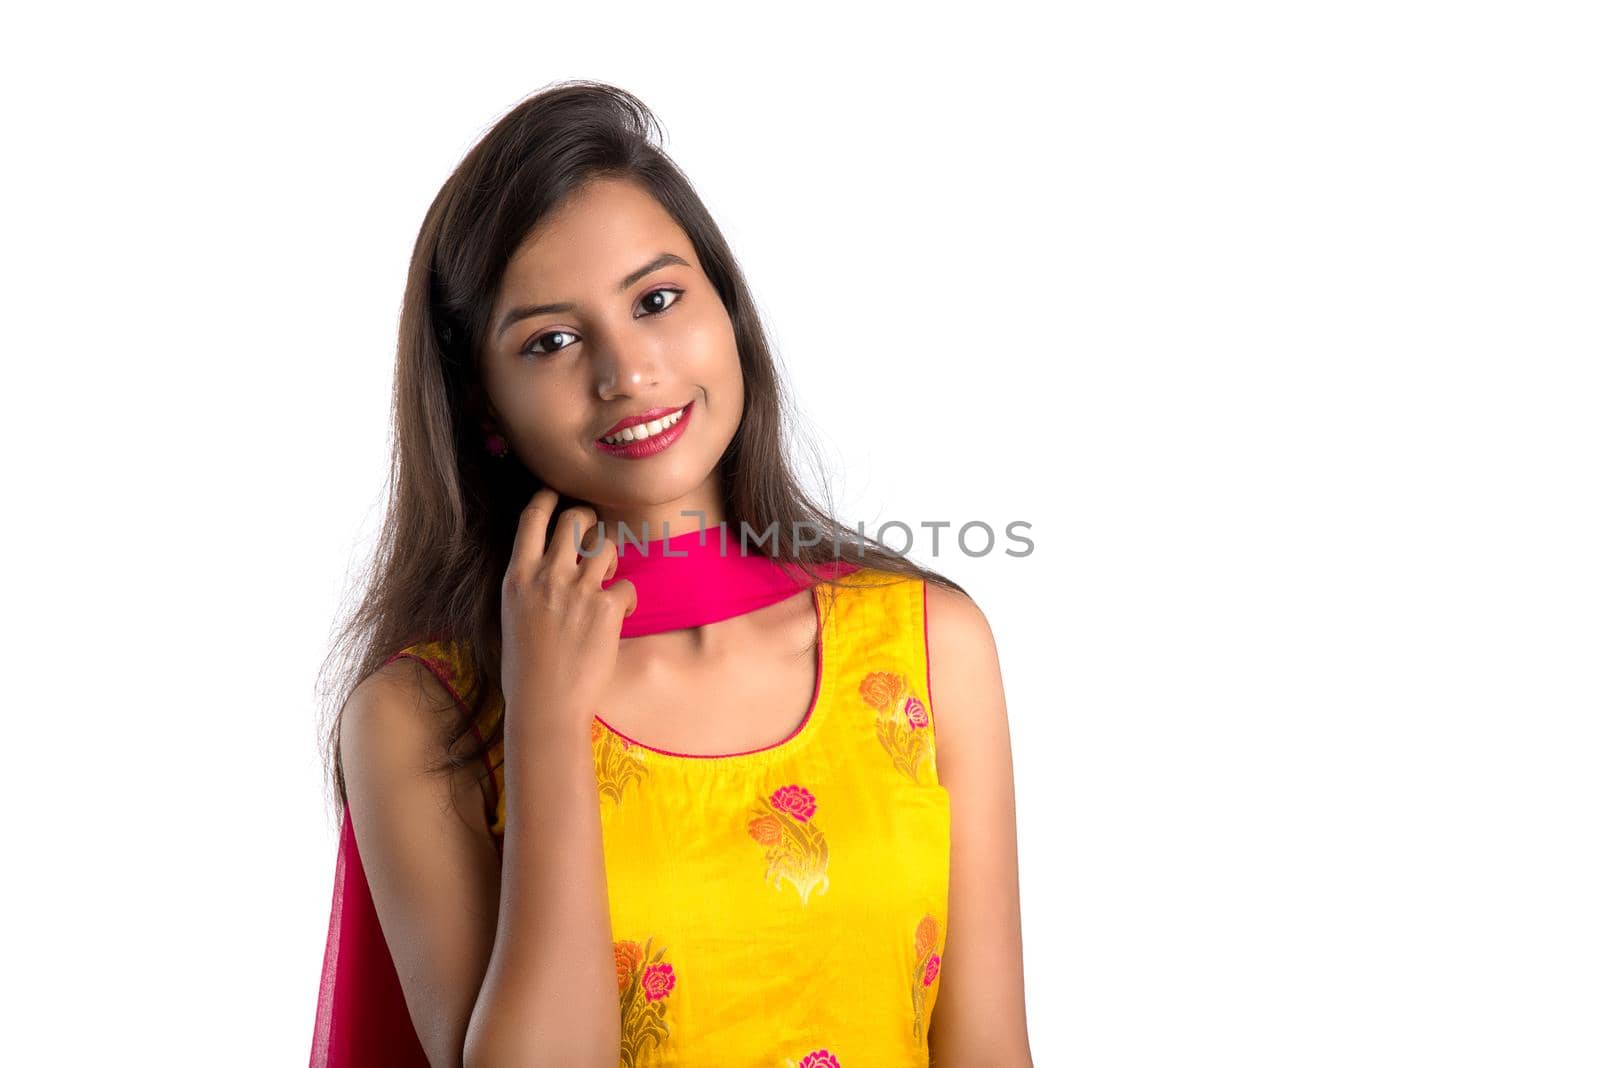 Portrait of beautiful young smiling girl on a white background.